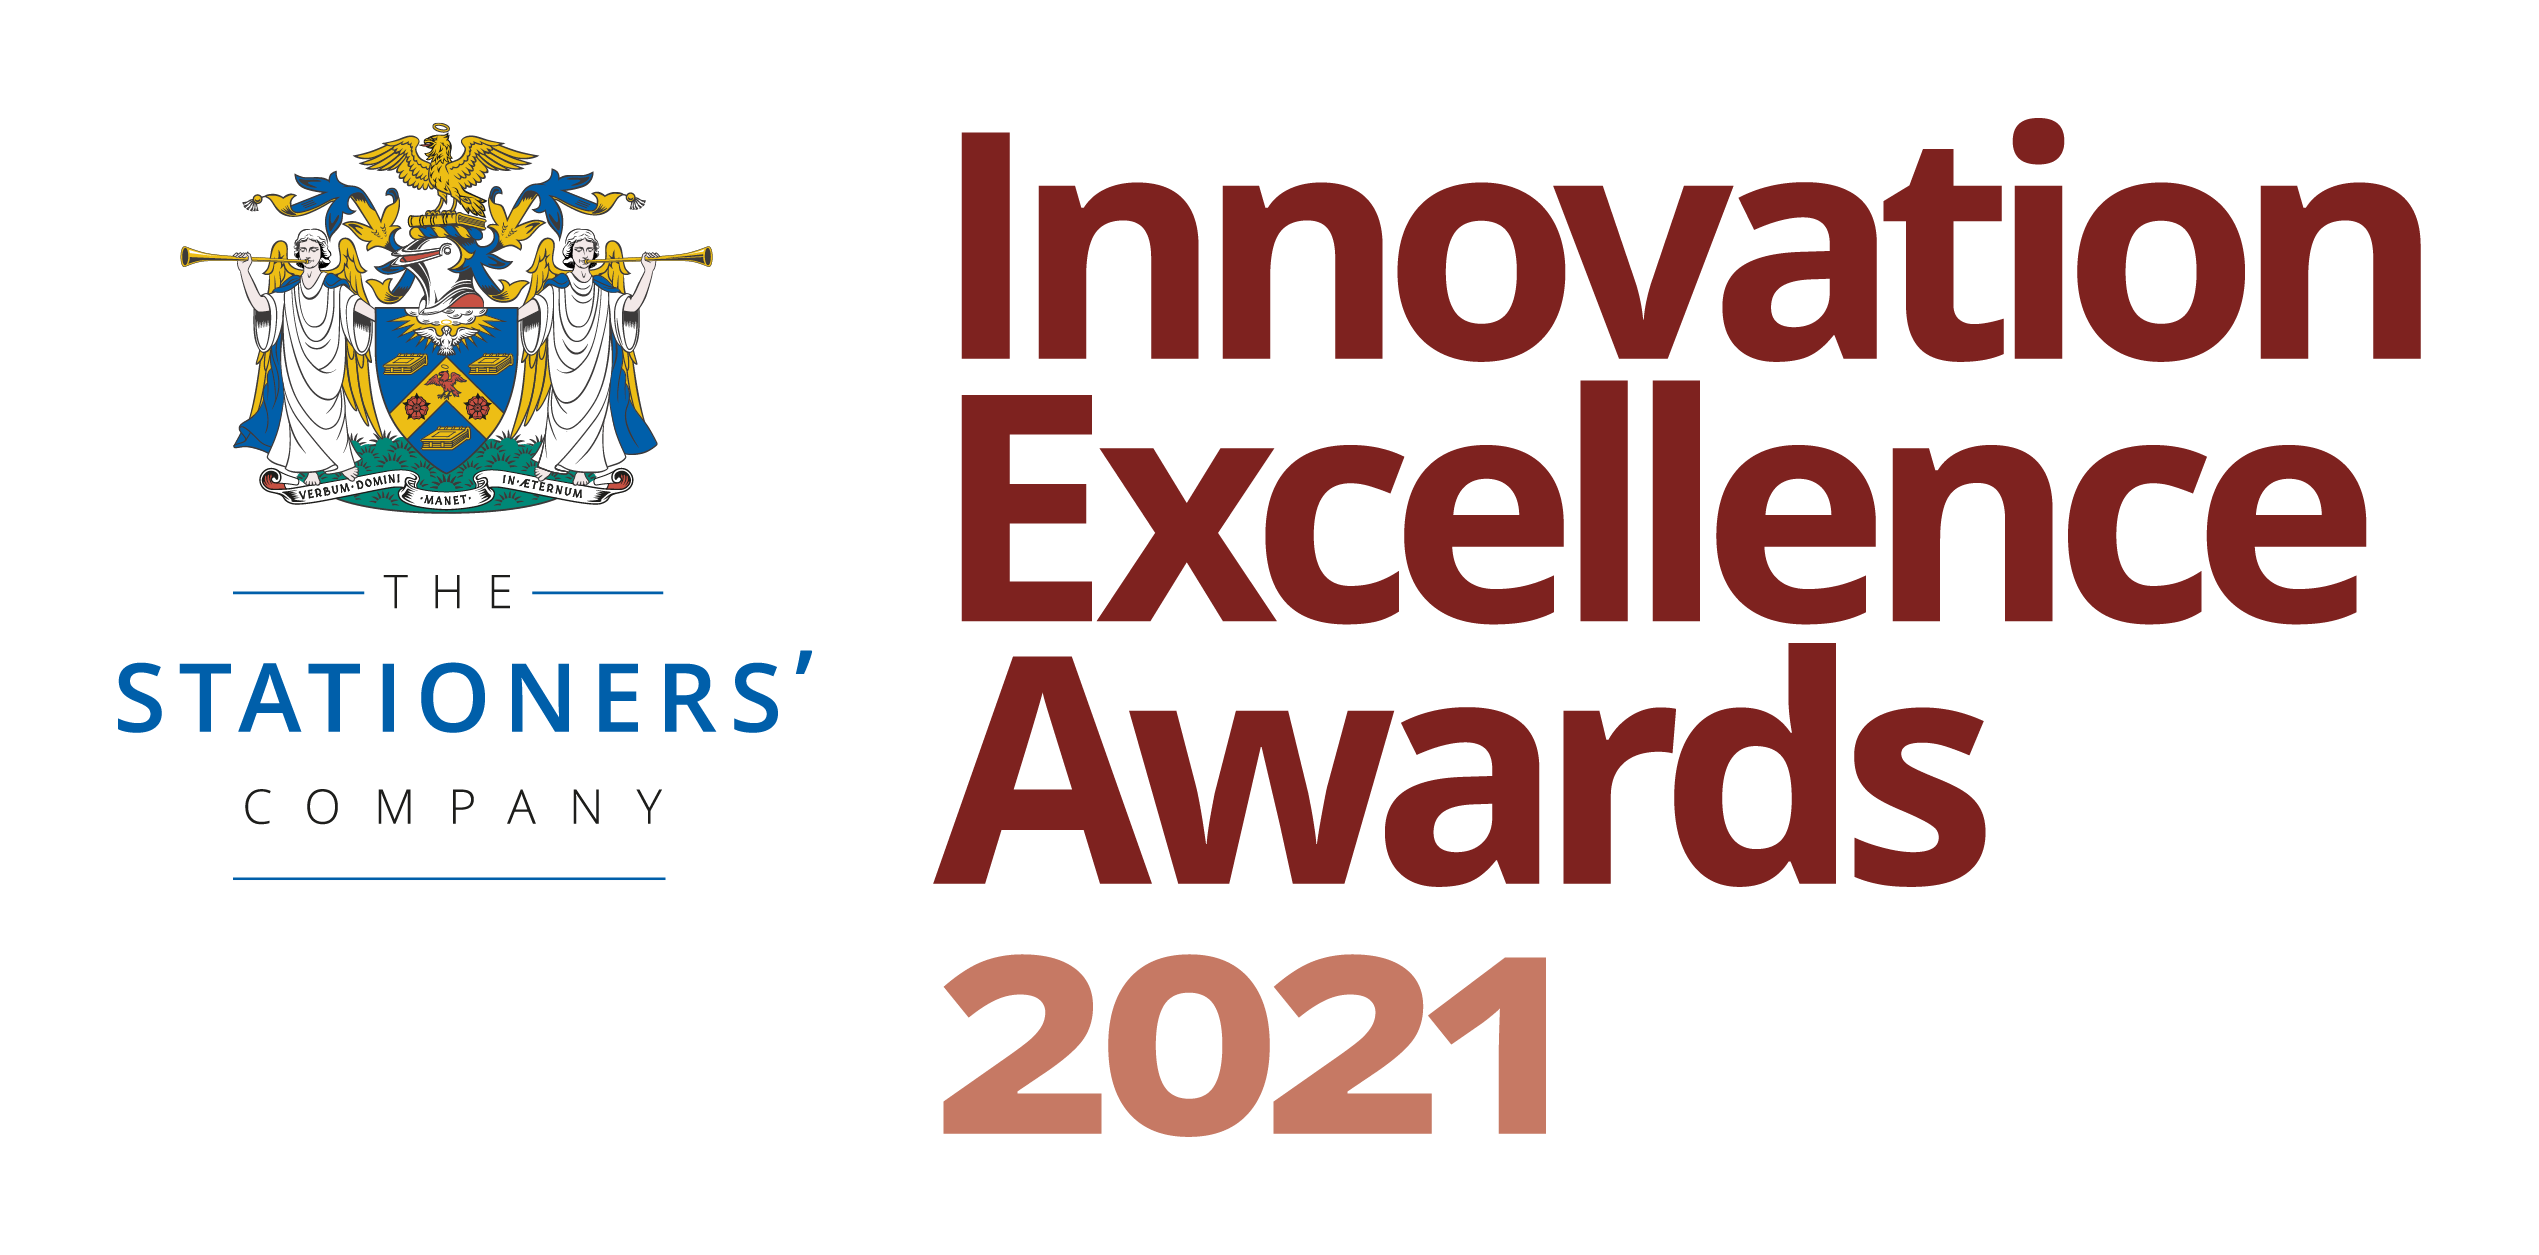 The Stationers' Company has announced that the Innovation Excellence Awards will go ahead this year!